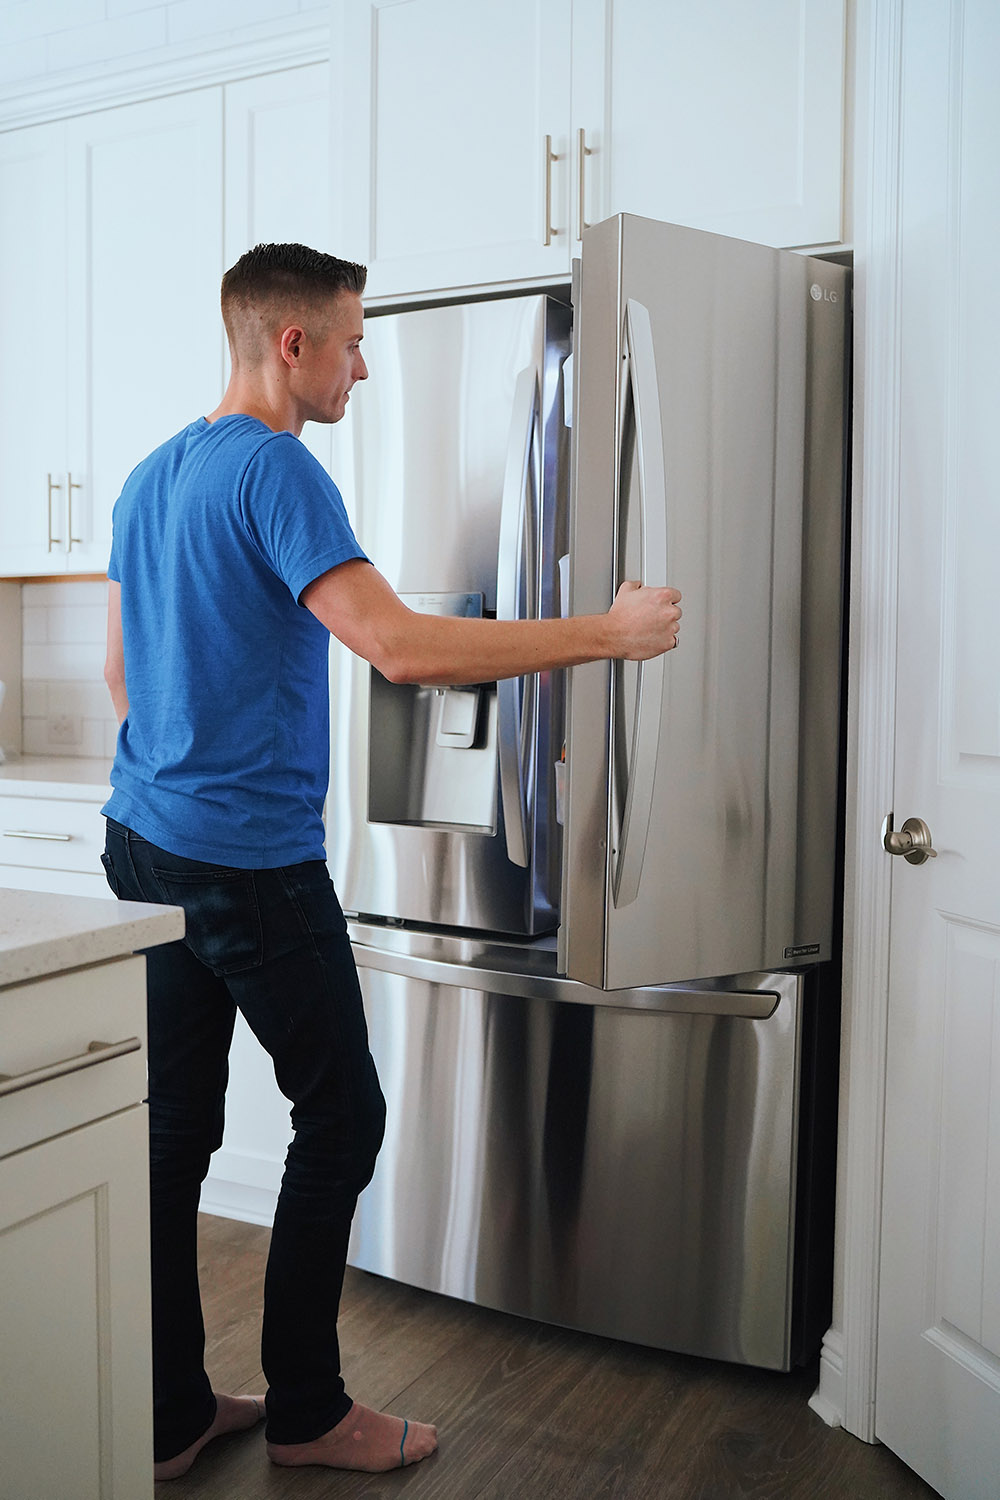 A man standing in front of a refrigerator holding the door open.